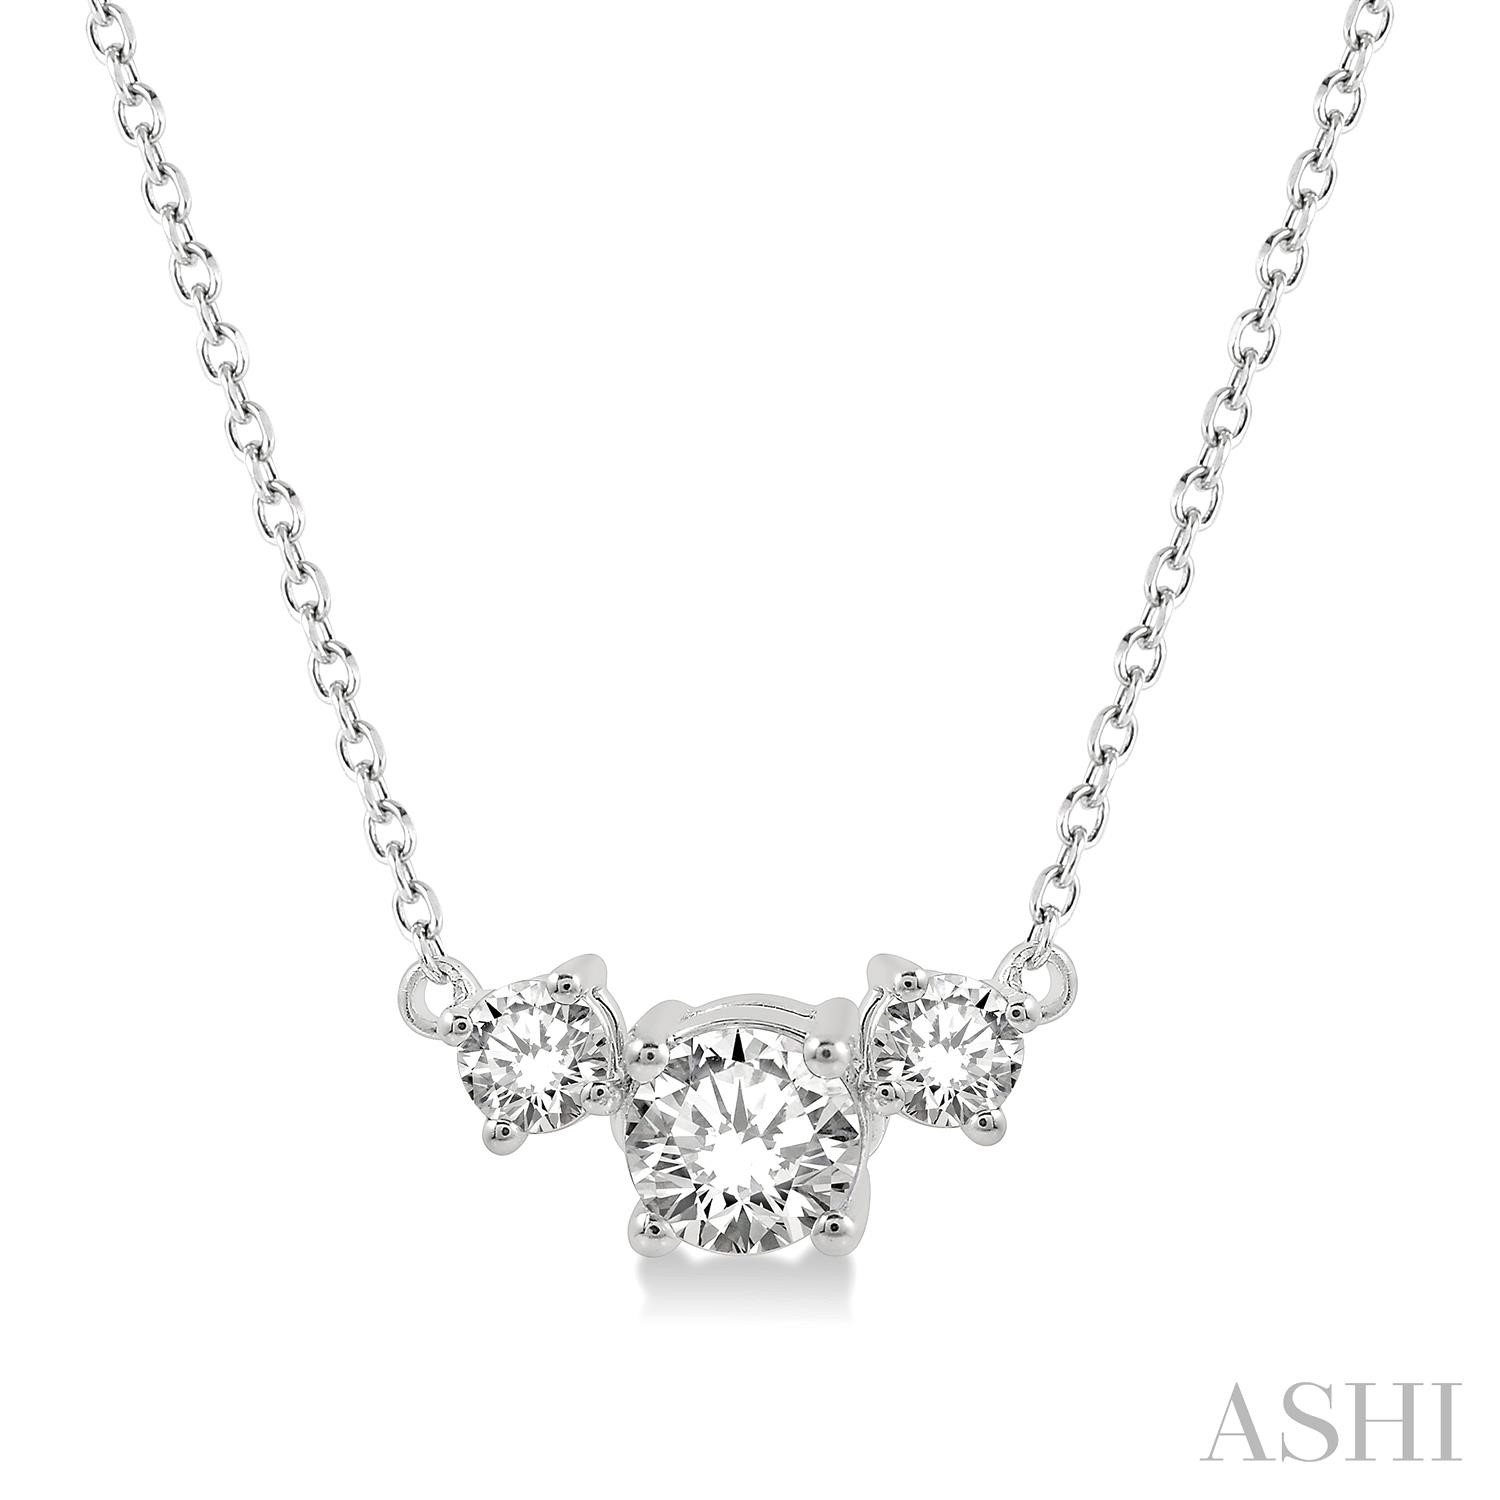 14K WHITE GOLD 3-STONE DIAMOND NECKLACE WITH ONE 0.32CT ROUND G-H SI1-SI2 DIAMOND AND 2=0.18TW ROUND G-H SI1-SI2 DIAMONDS 18